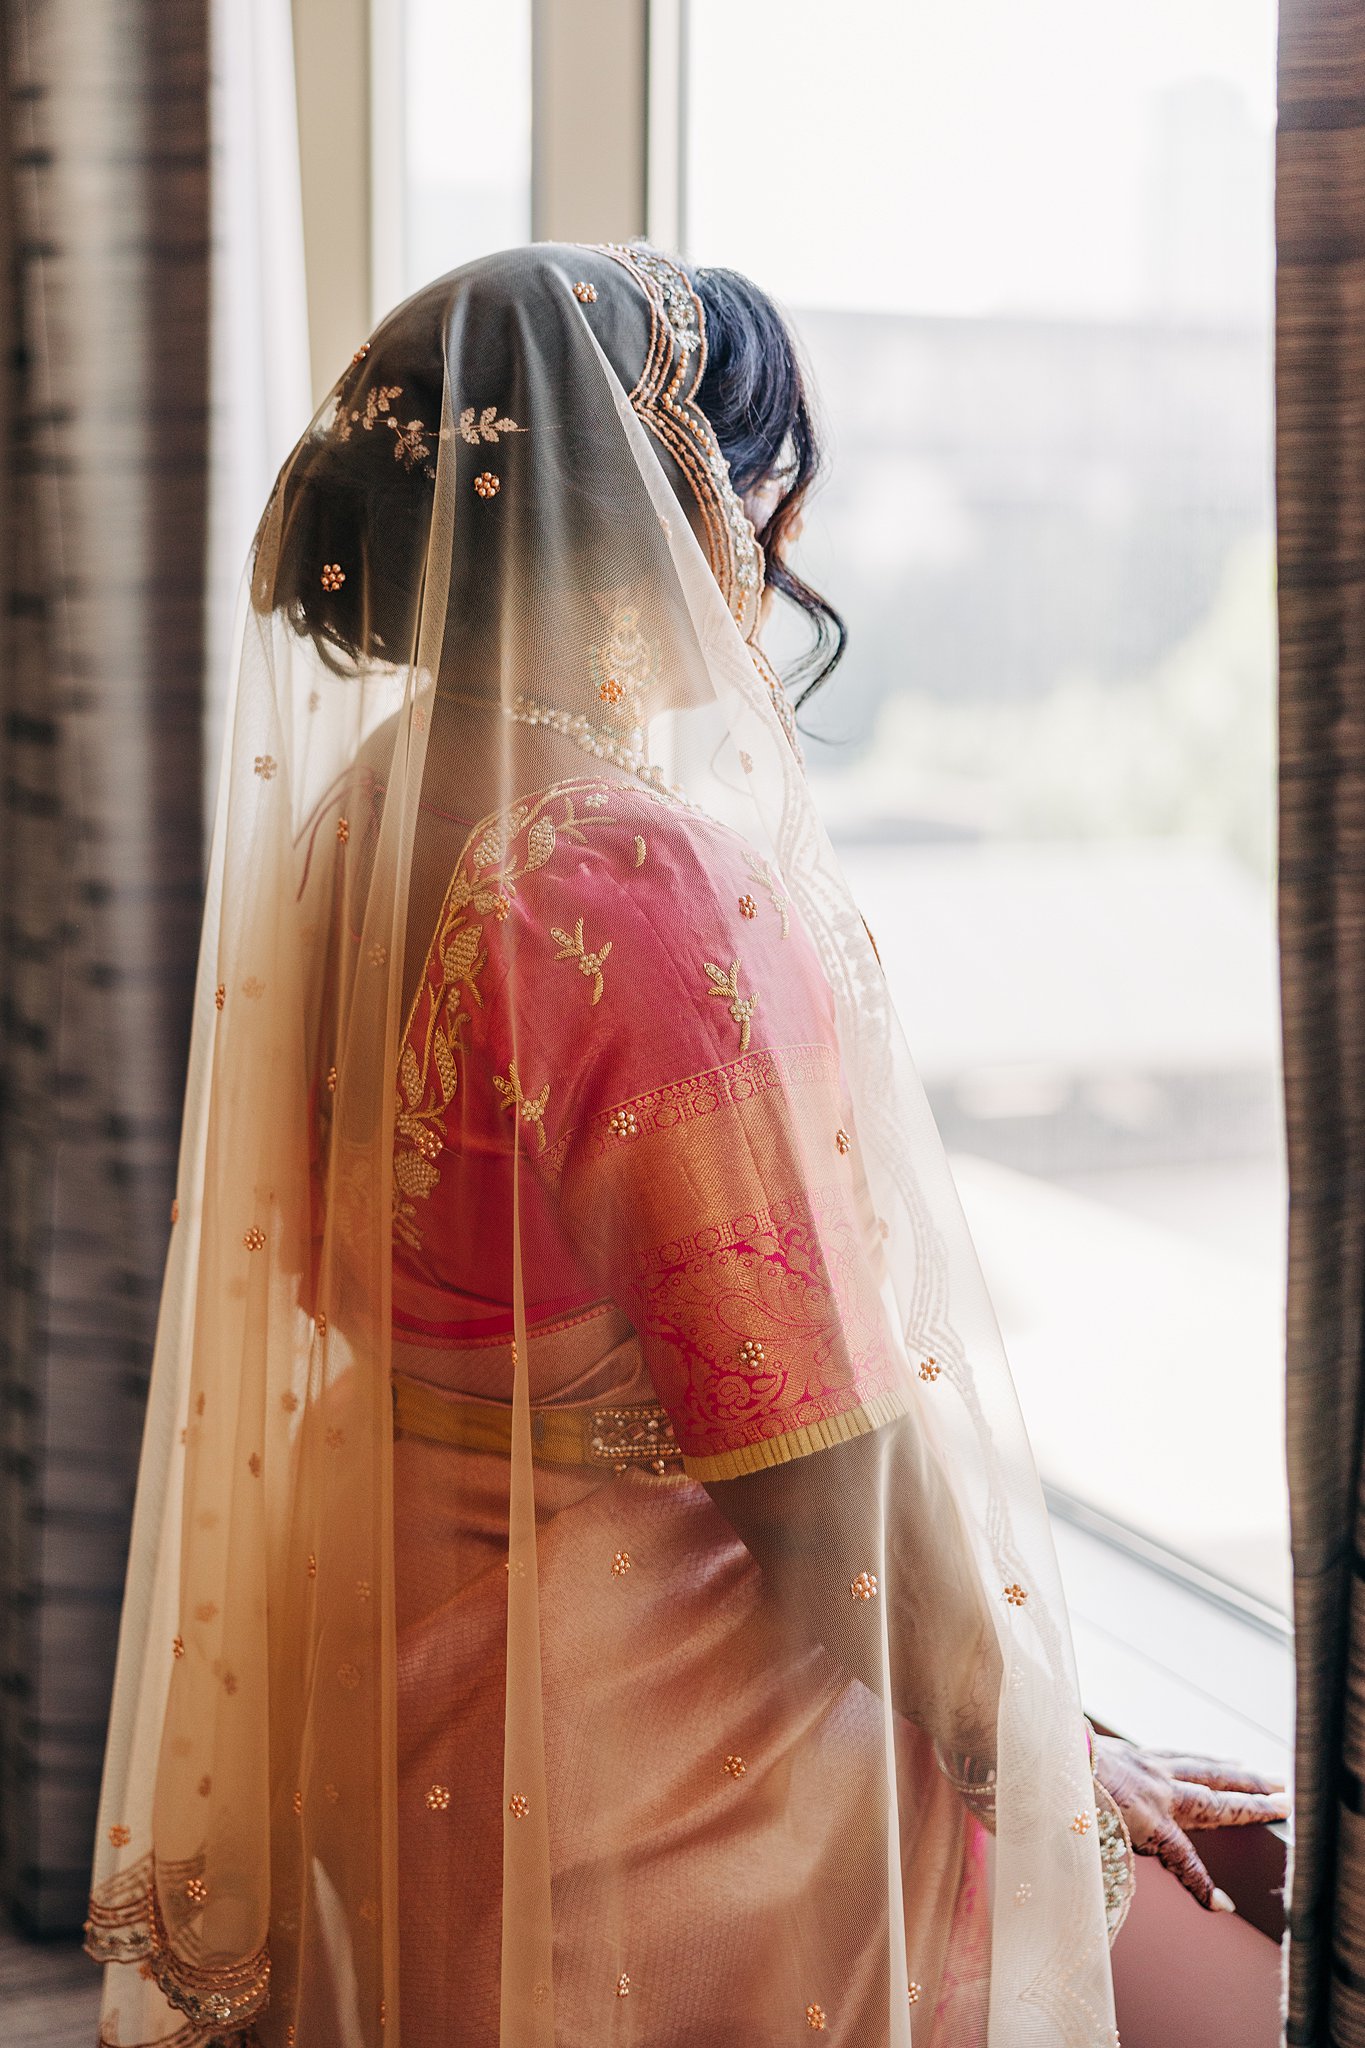 A bride in a pink traditional wedding outfit stands in a window